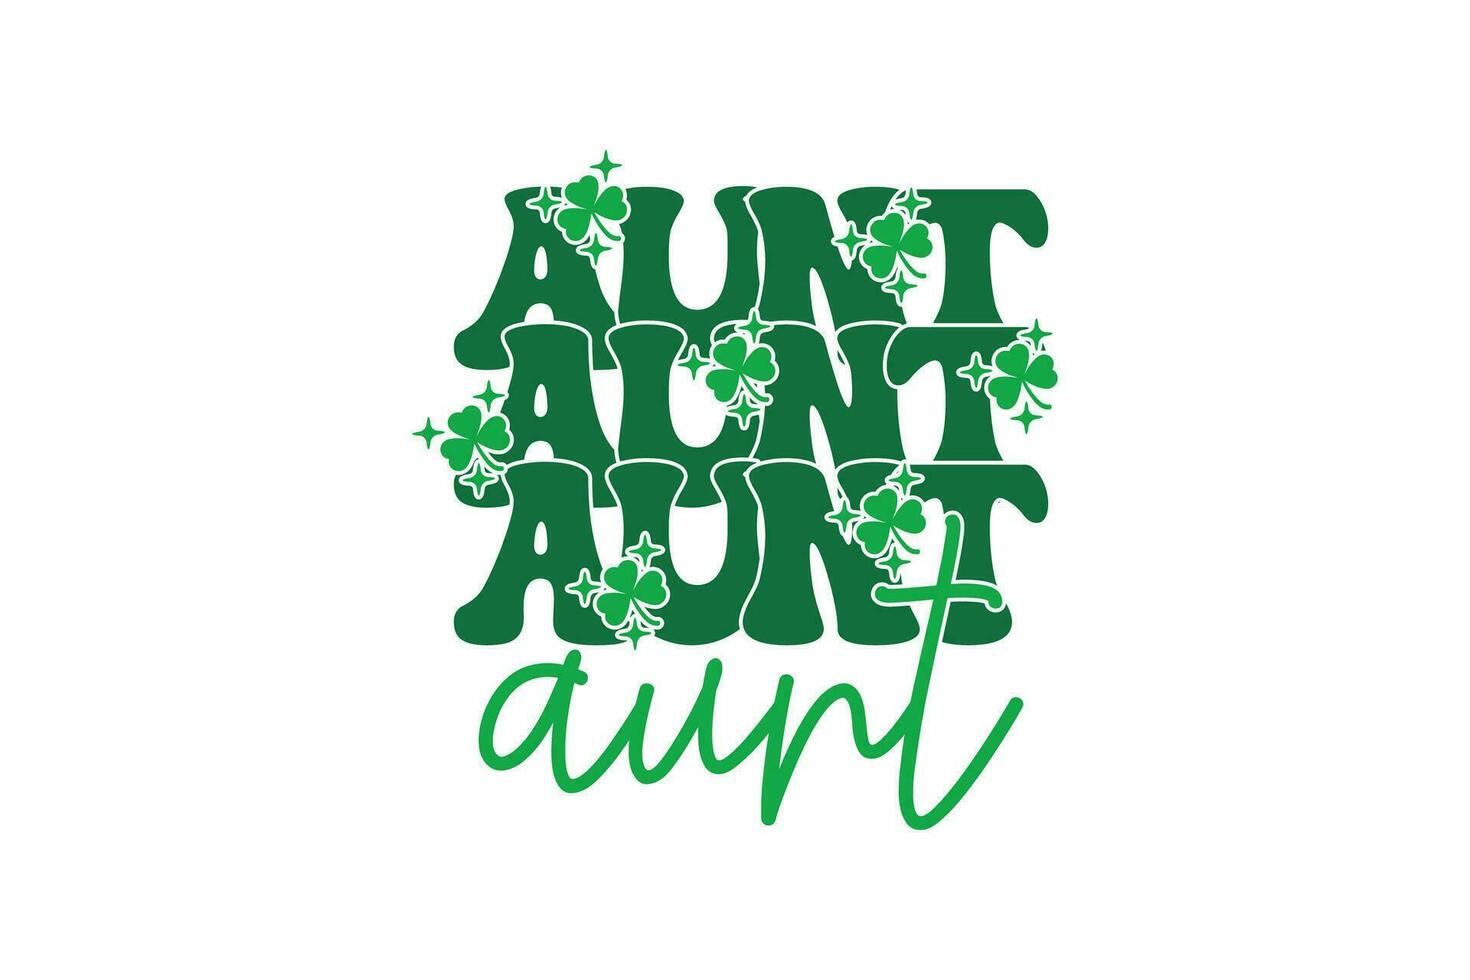 Lucky Auntie St Patrick's Day EPS T-shirt Design, St Patrick's Day T shirt design, funny St Patrick's Day inspirational lettering design for posters vector